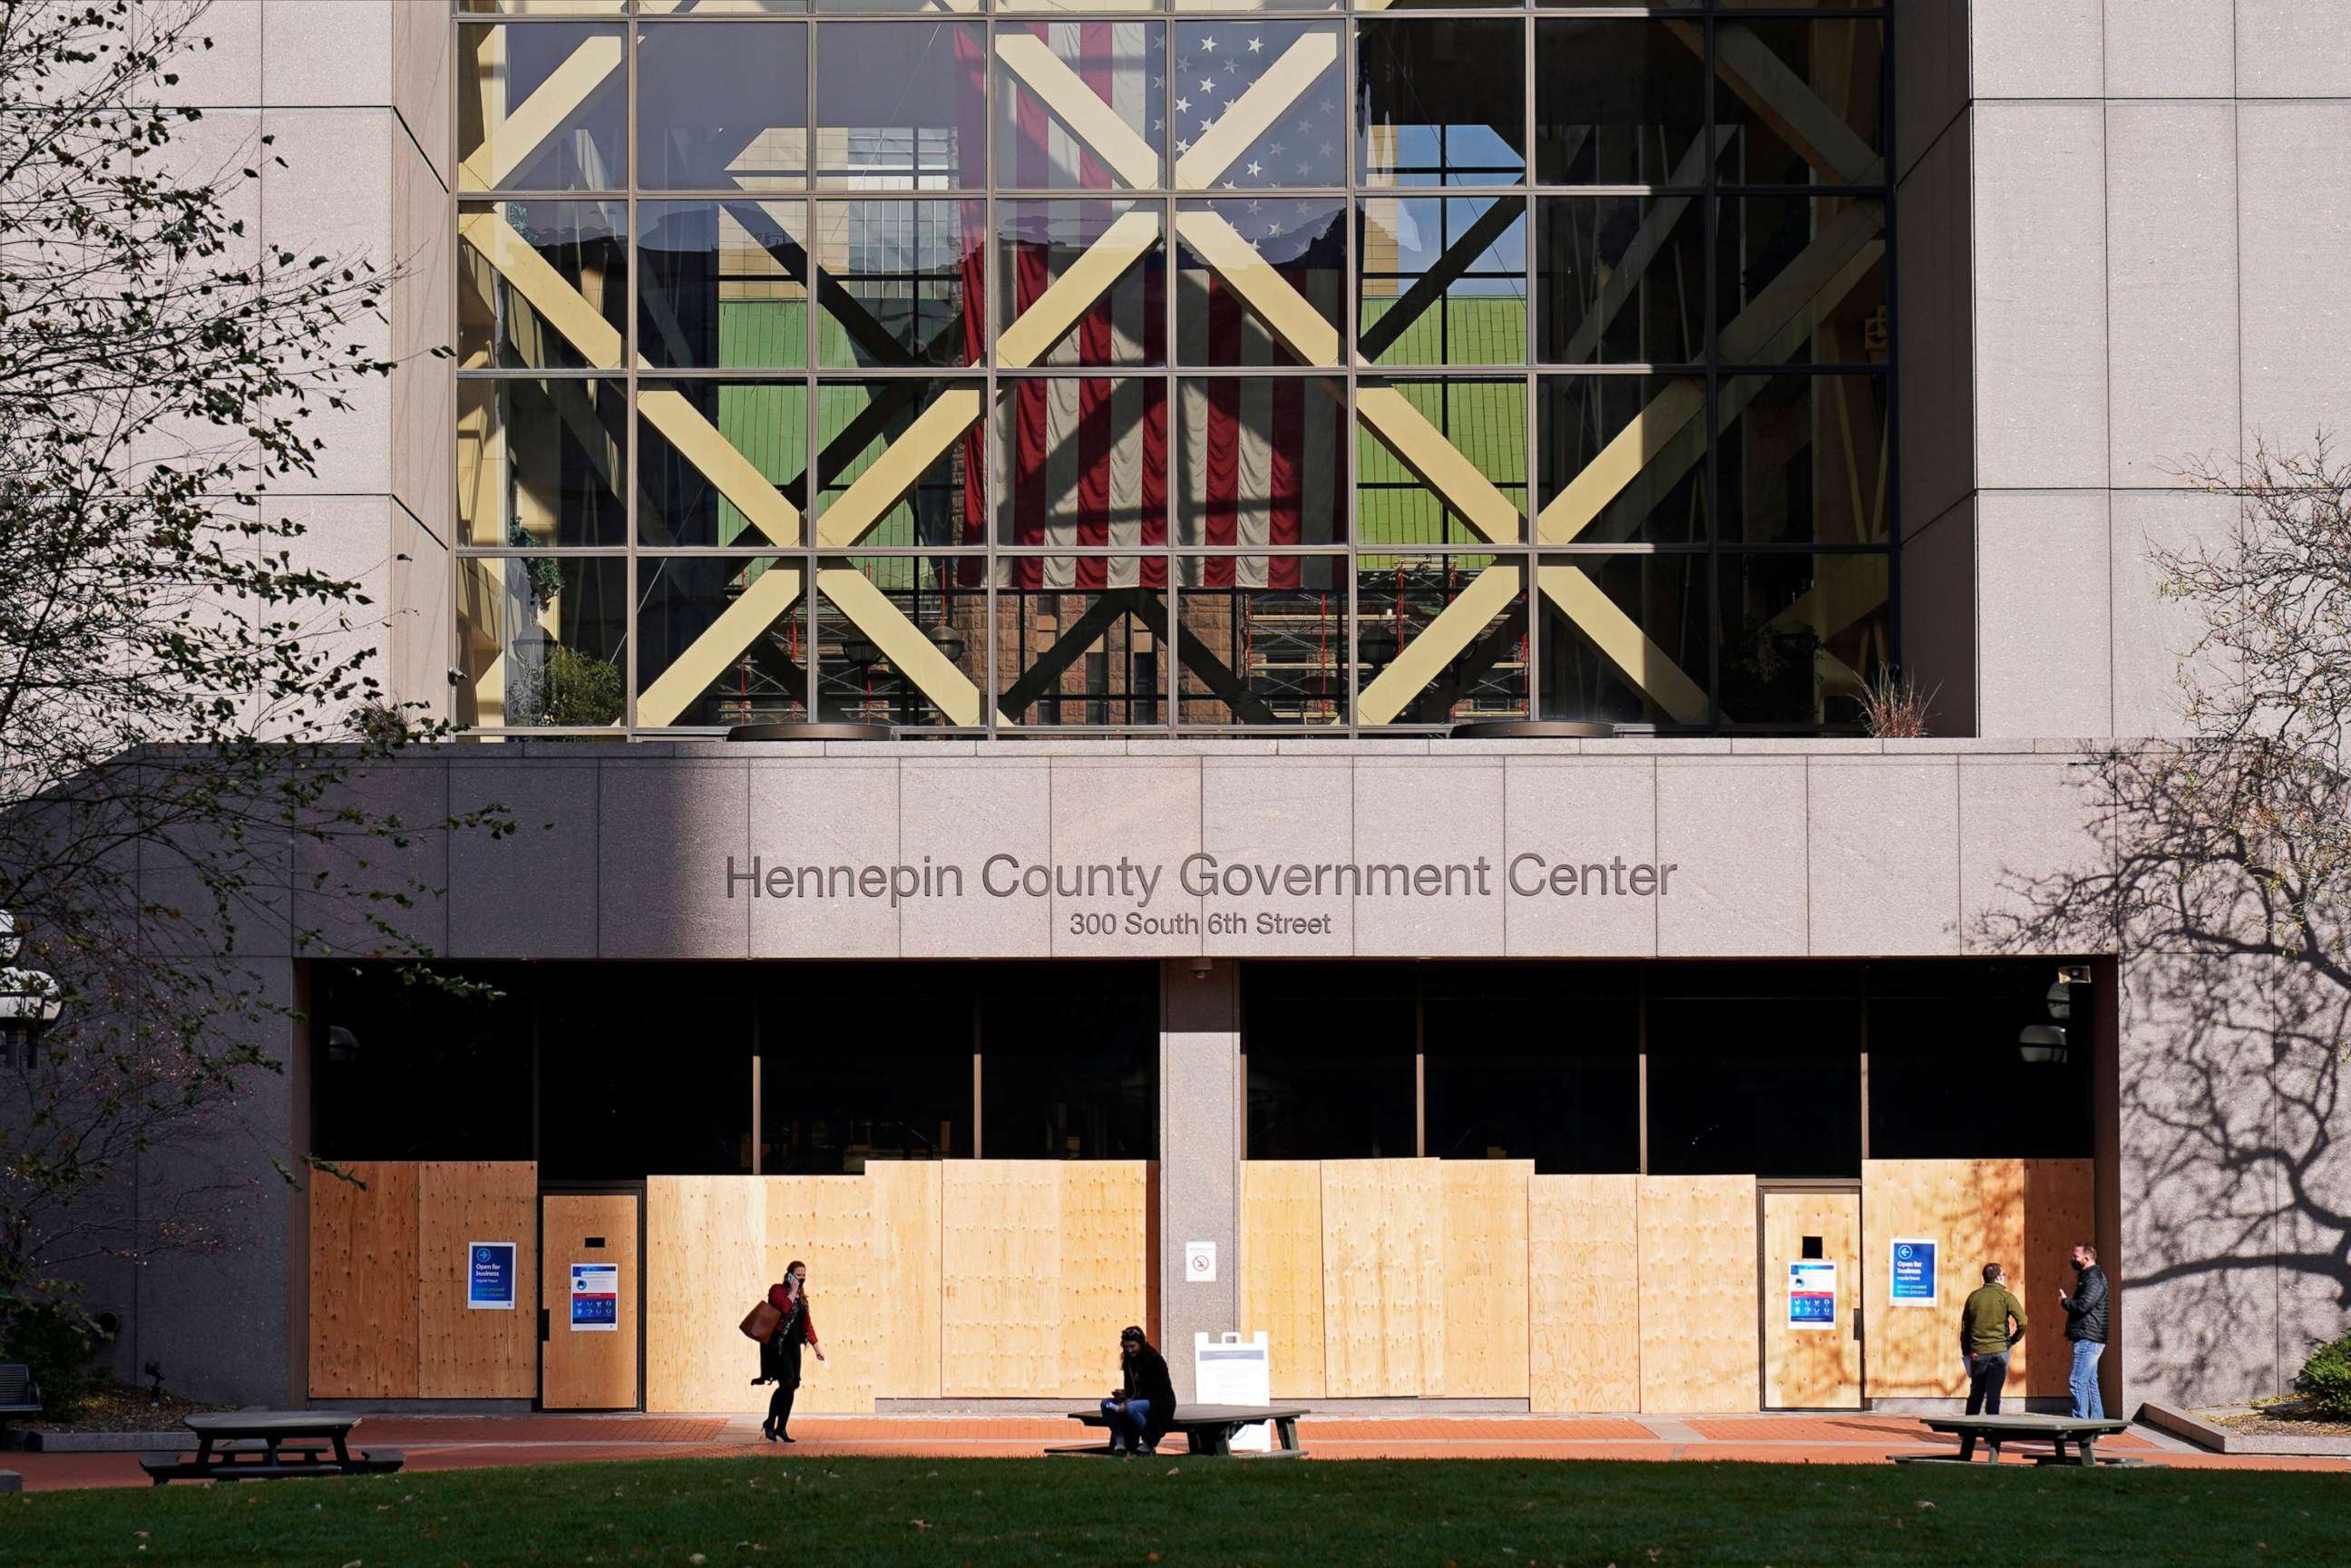 PHOTO: The Government Center, though open for business, remains boarded up, Nov. 2, 2020, in Minneapolis ahead of Tuesday's general election.